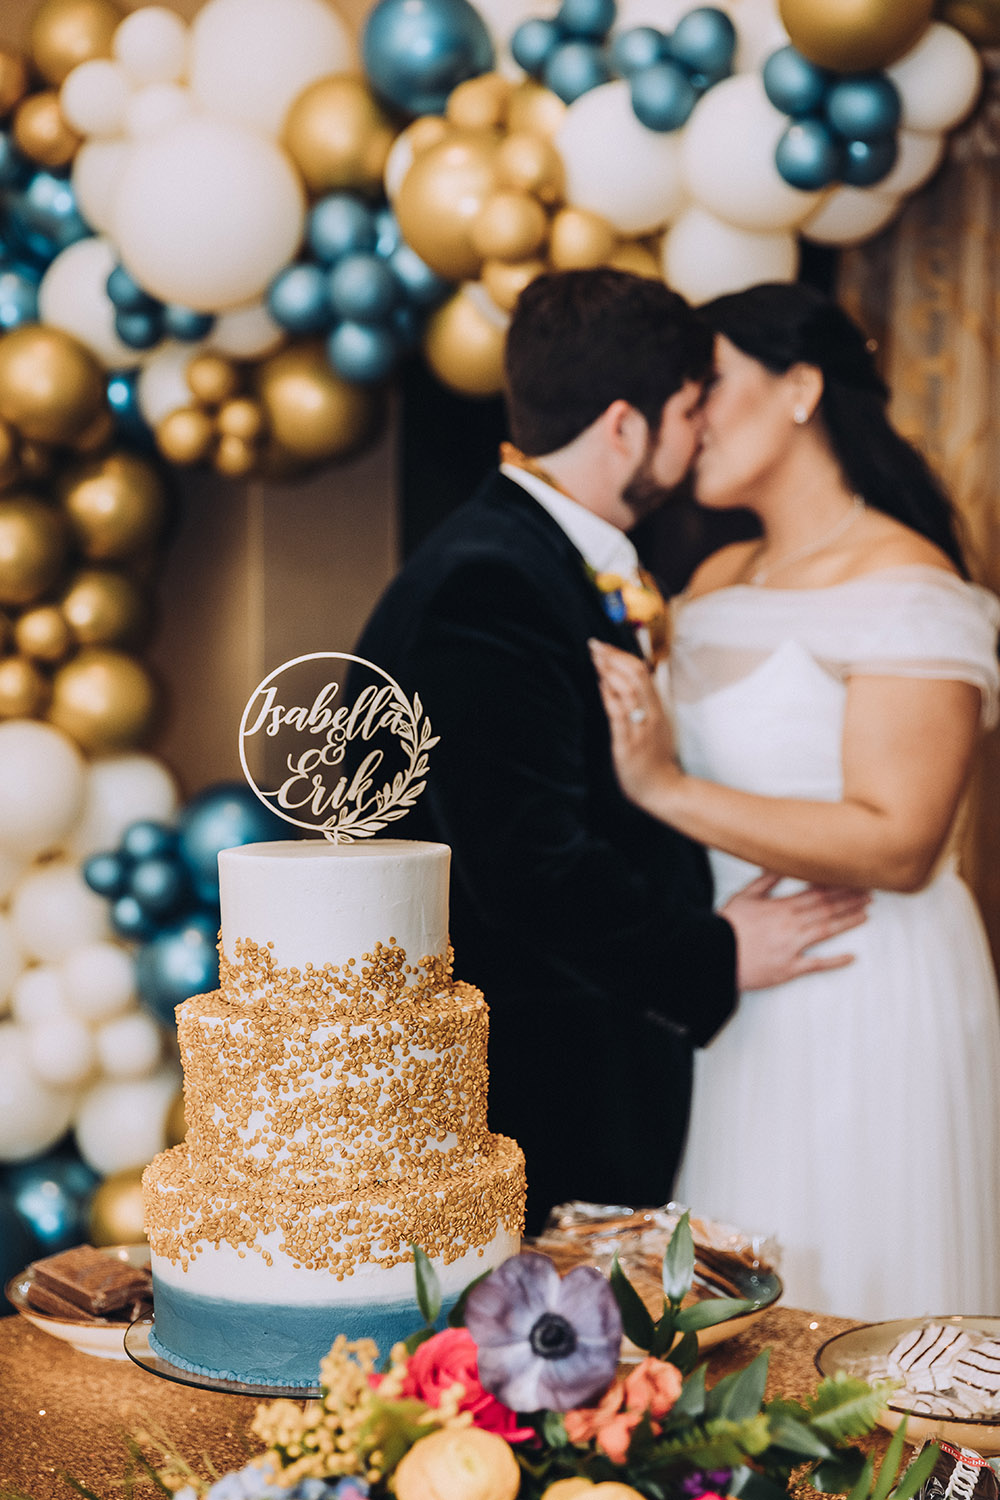 The bride and groom kiss by the wedding cake